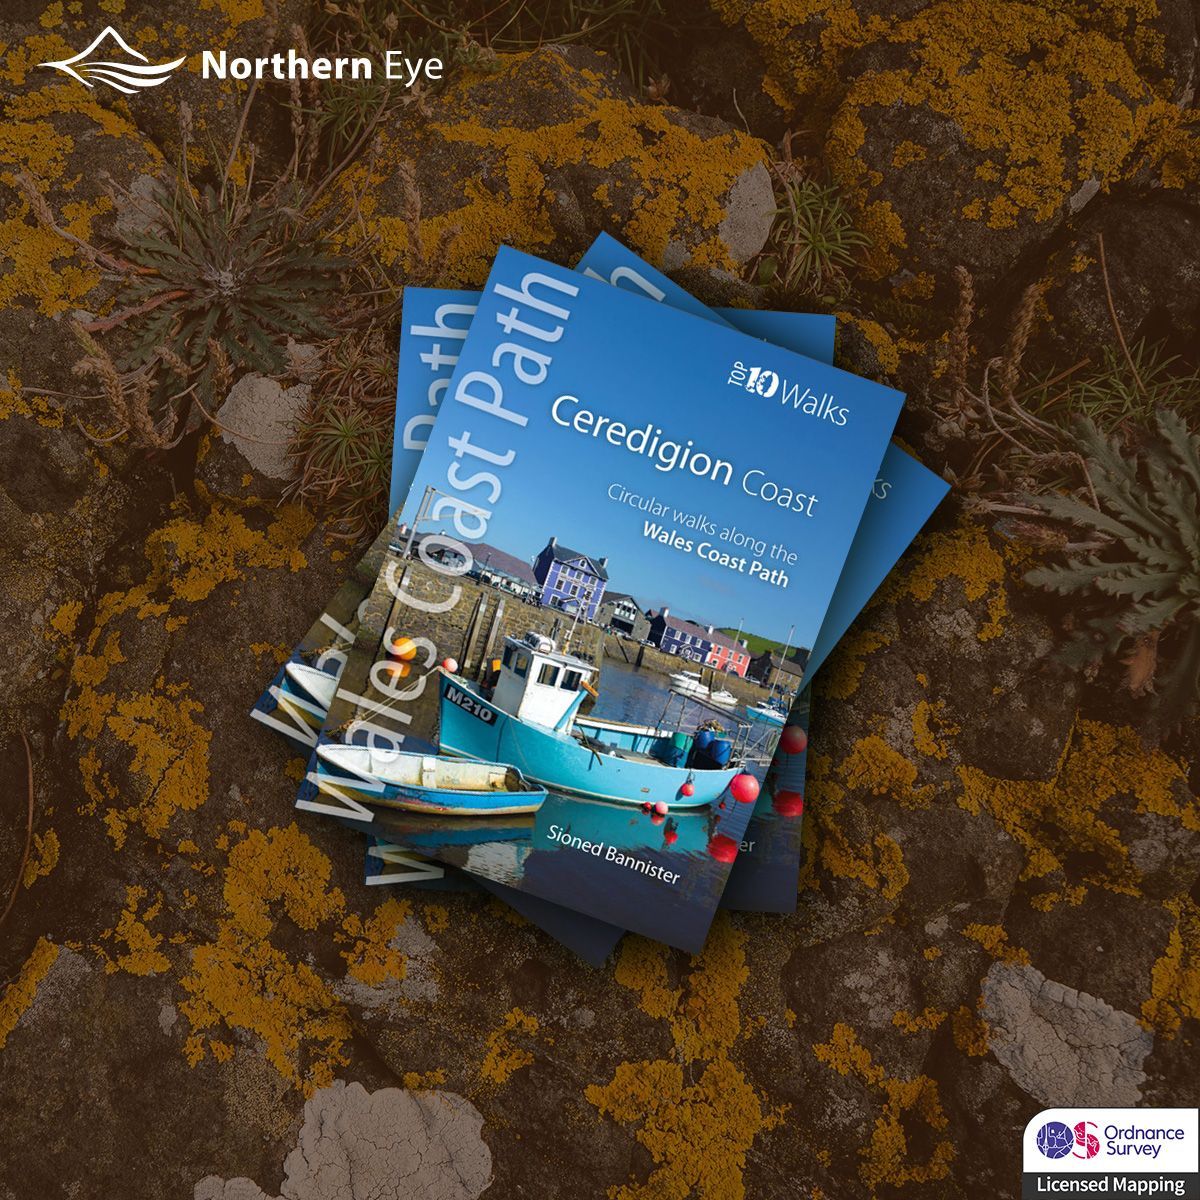 Our 'Top 10 Walks' guide to the Ceredigion Coast contains ten of the very best scenic circular walks on offer. Available through local walking book stockists and online at buff.ly/3n1bbsx #WalesCoastPath #LlwybrArfordirCymru #VisitWales #CroesoCymru